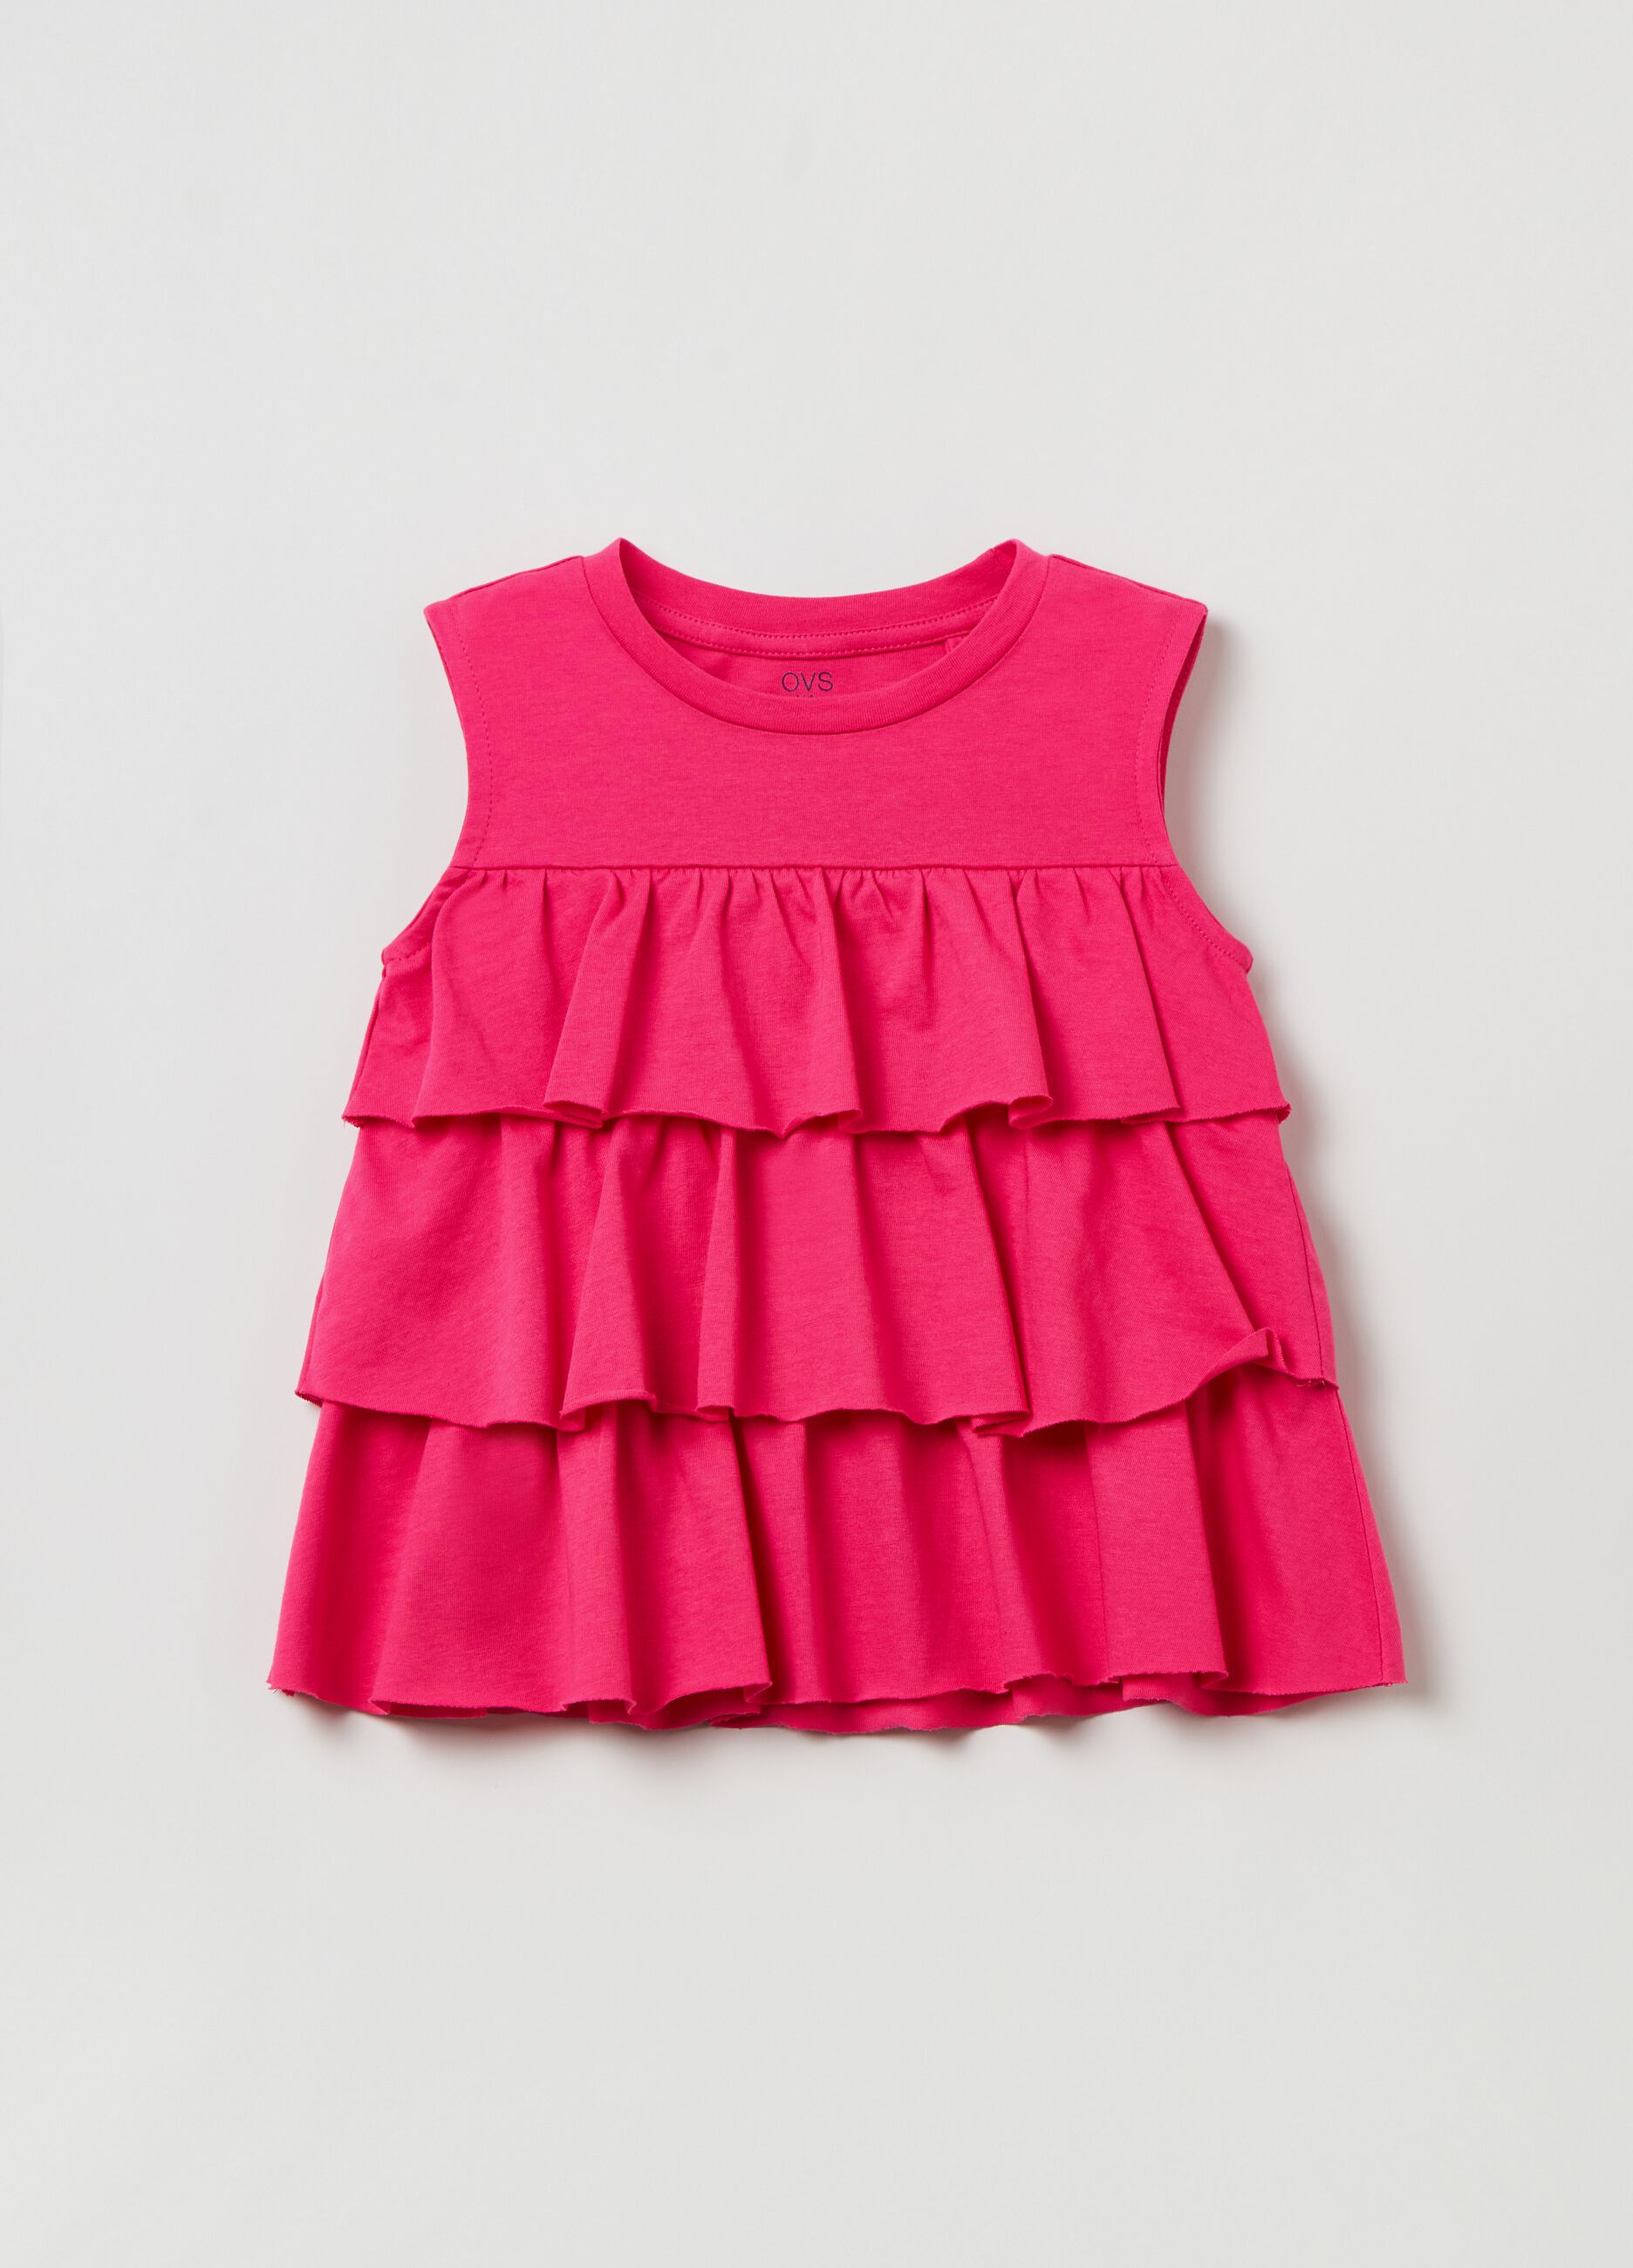 Sleeveless T-shirt in cotton with flounces